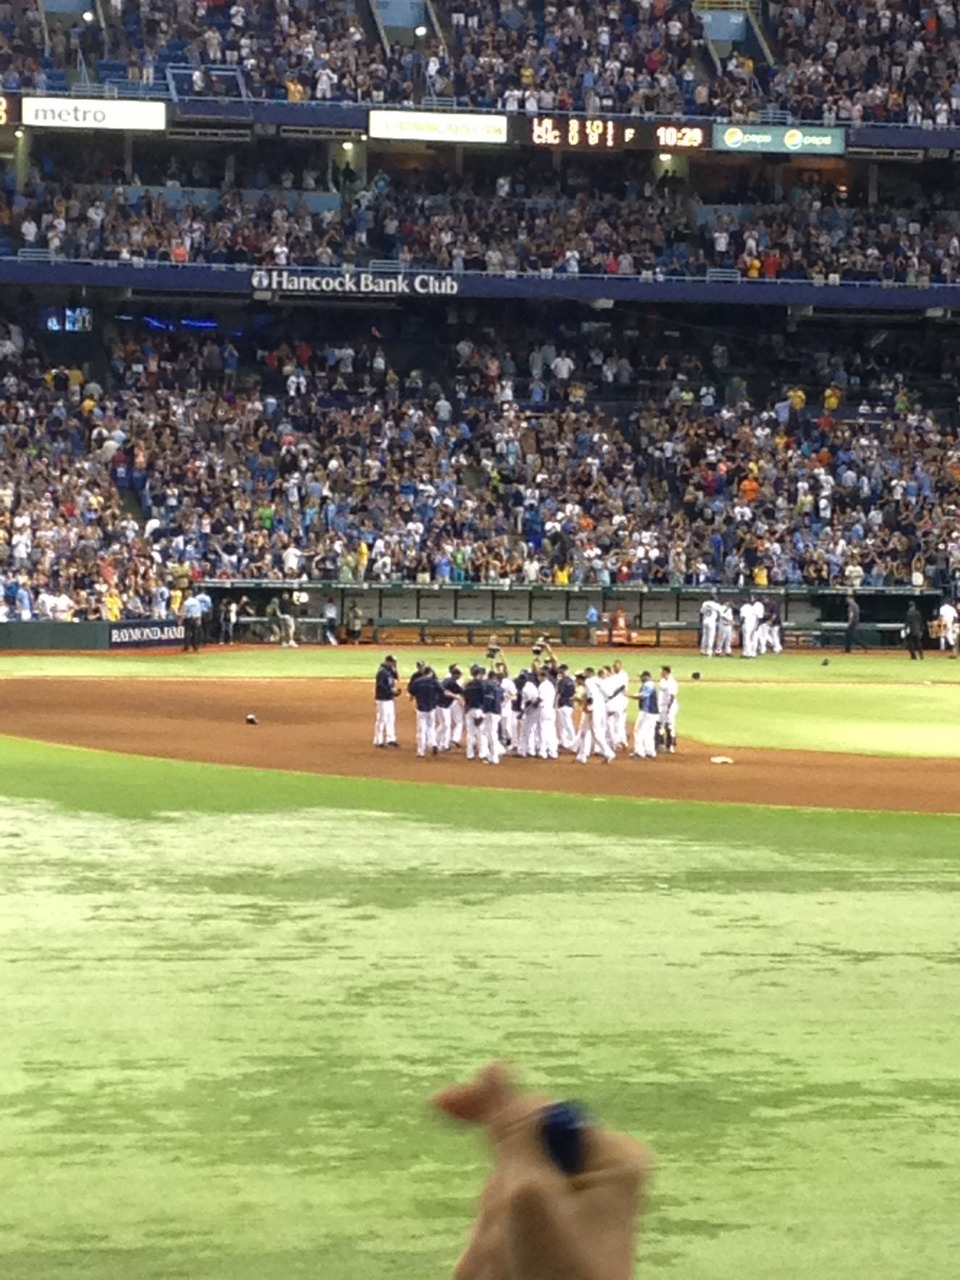 Do the bounce! The Rays mobbed Wil Myers after he hit the game winning single to center.